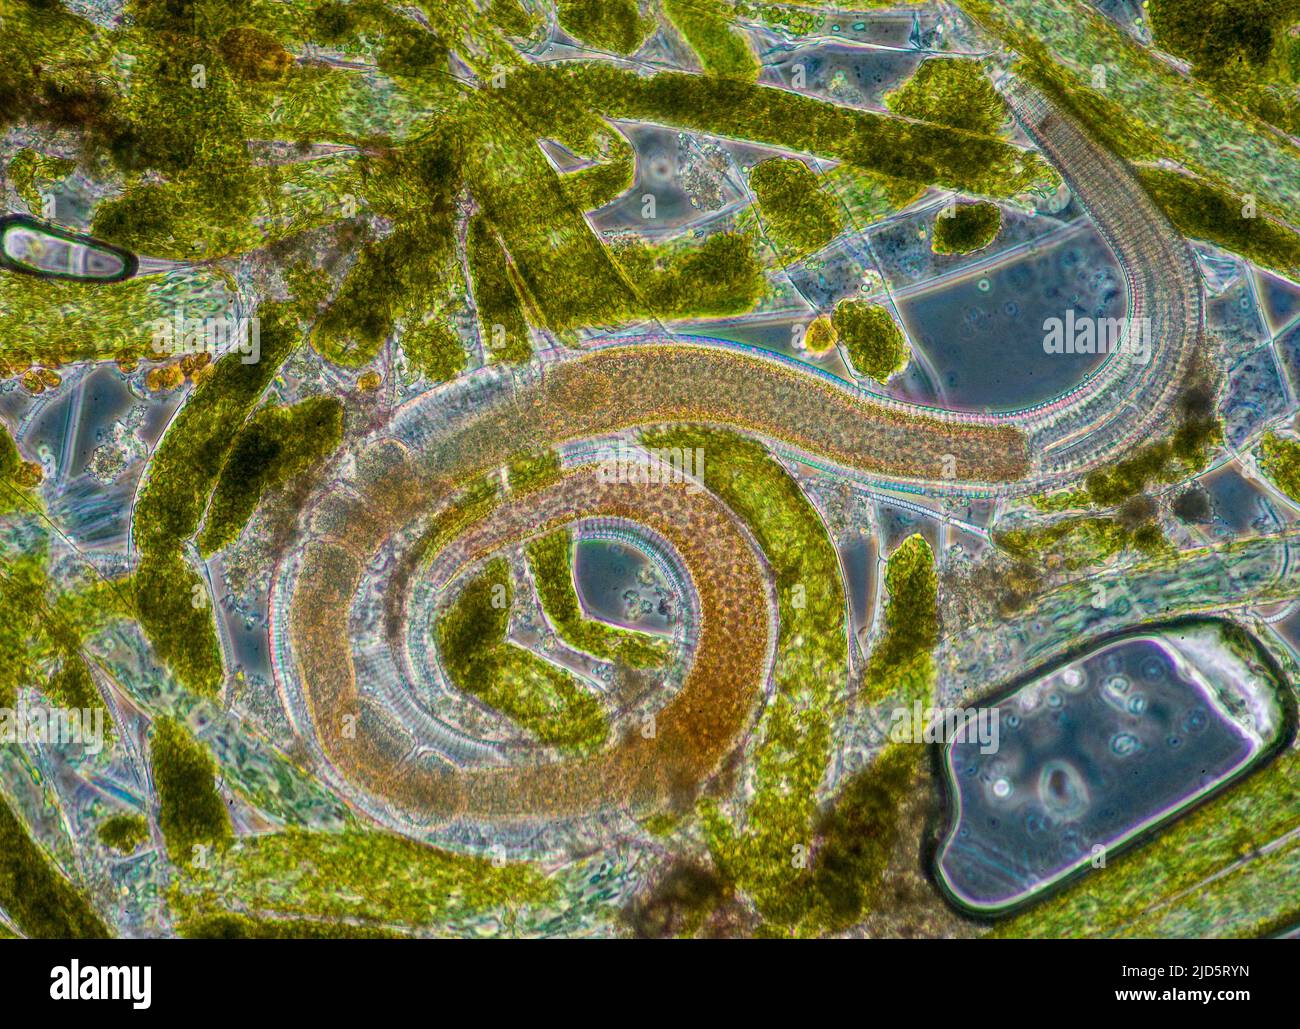 A roundworm embedded in microscopic green, filamentous algae. Collected from a marine aquarium. Stock Photo